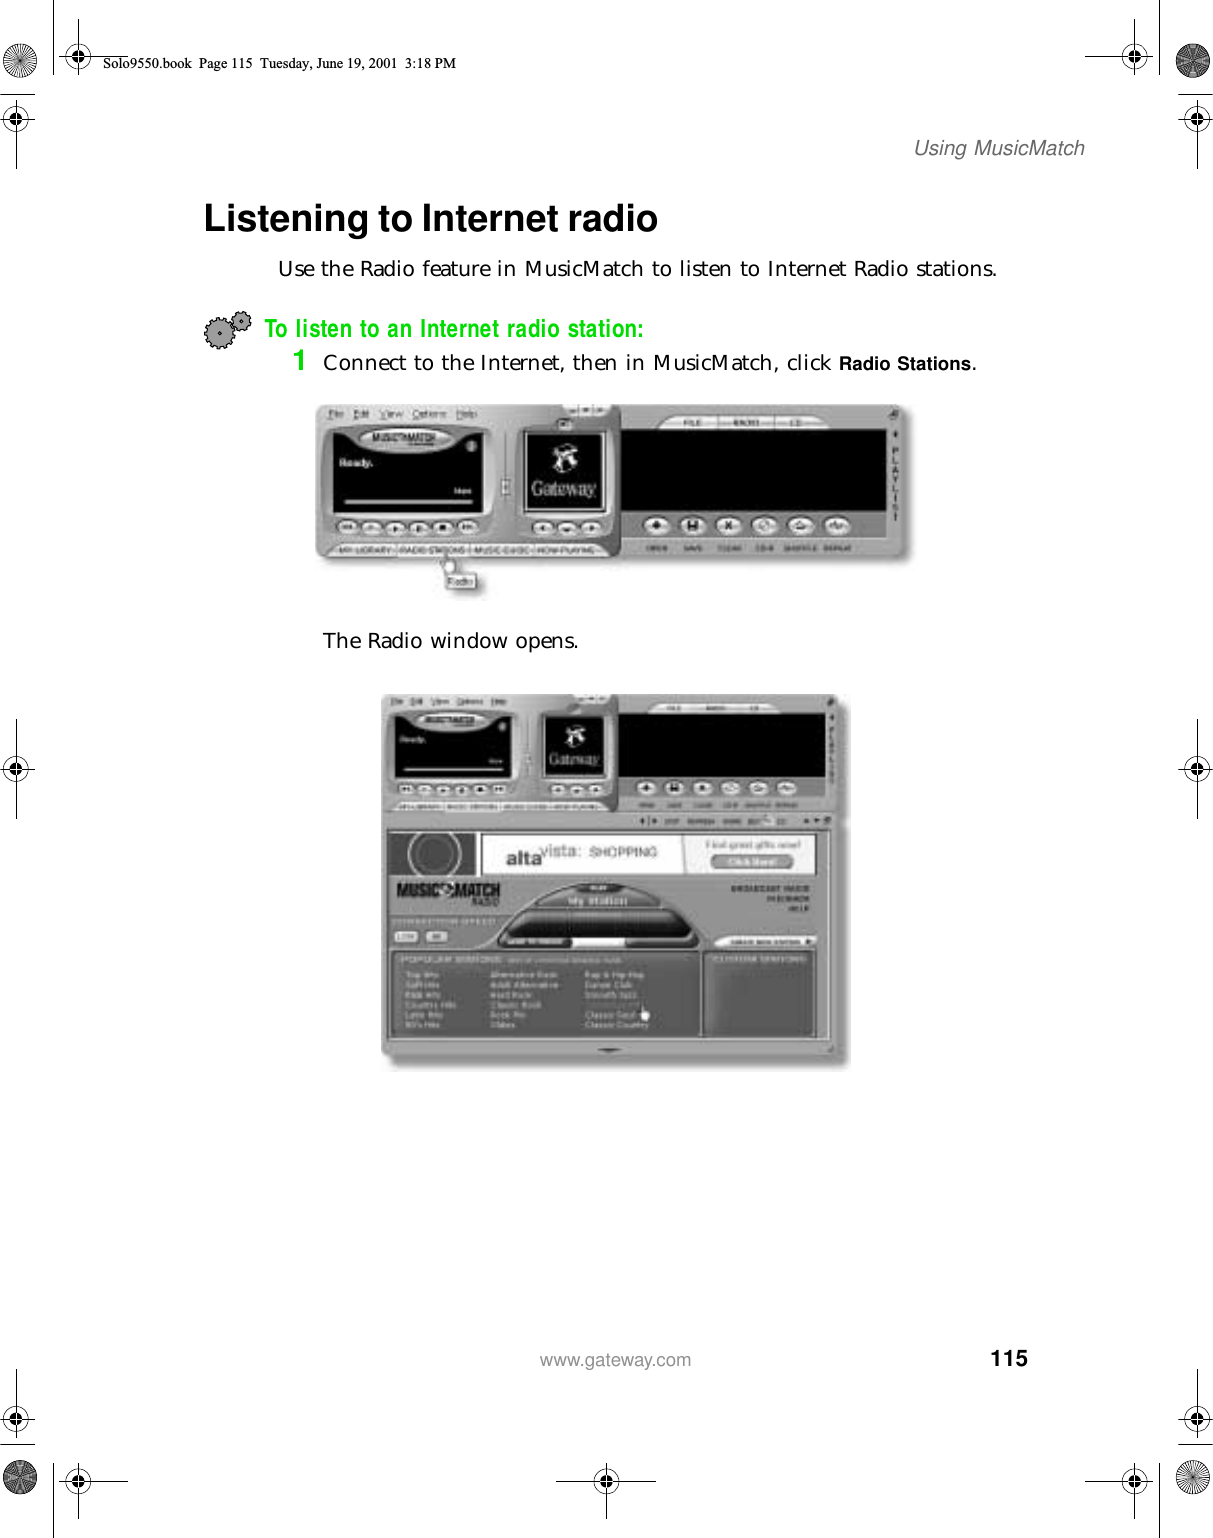 115Using MusicMatchwww.gateway.comListening to Internet radio Use the Radio feature in MusicMatch to listen to Internet Radio stations.To listen to an Internet radio station:1Connect to the Internet, then in MusicMatch, click Radio Stations.The Radio window opens.Solo9550.book Page 115 Tuesday, June 19, 2001 3:18 PM